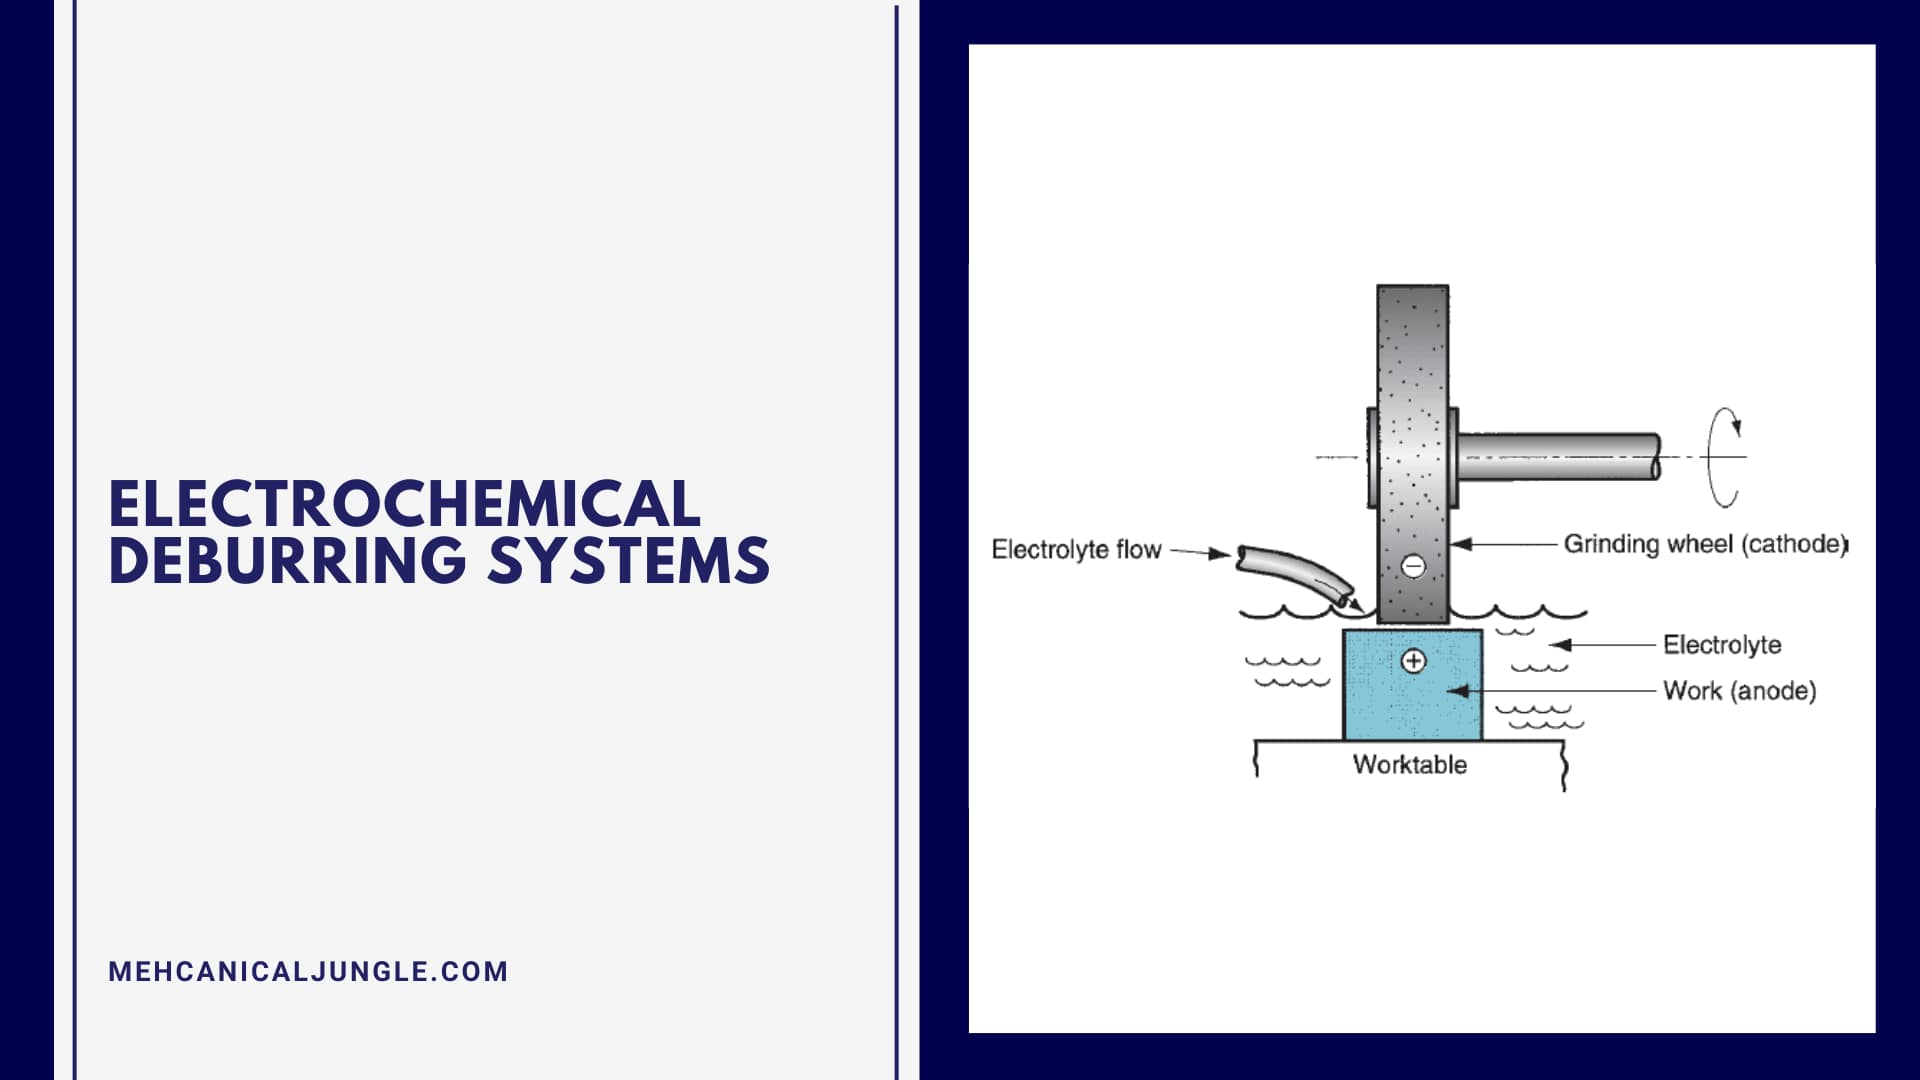 Electrochemical Deburring Systems